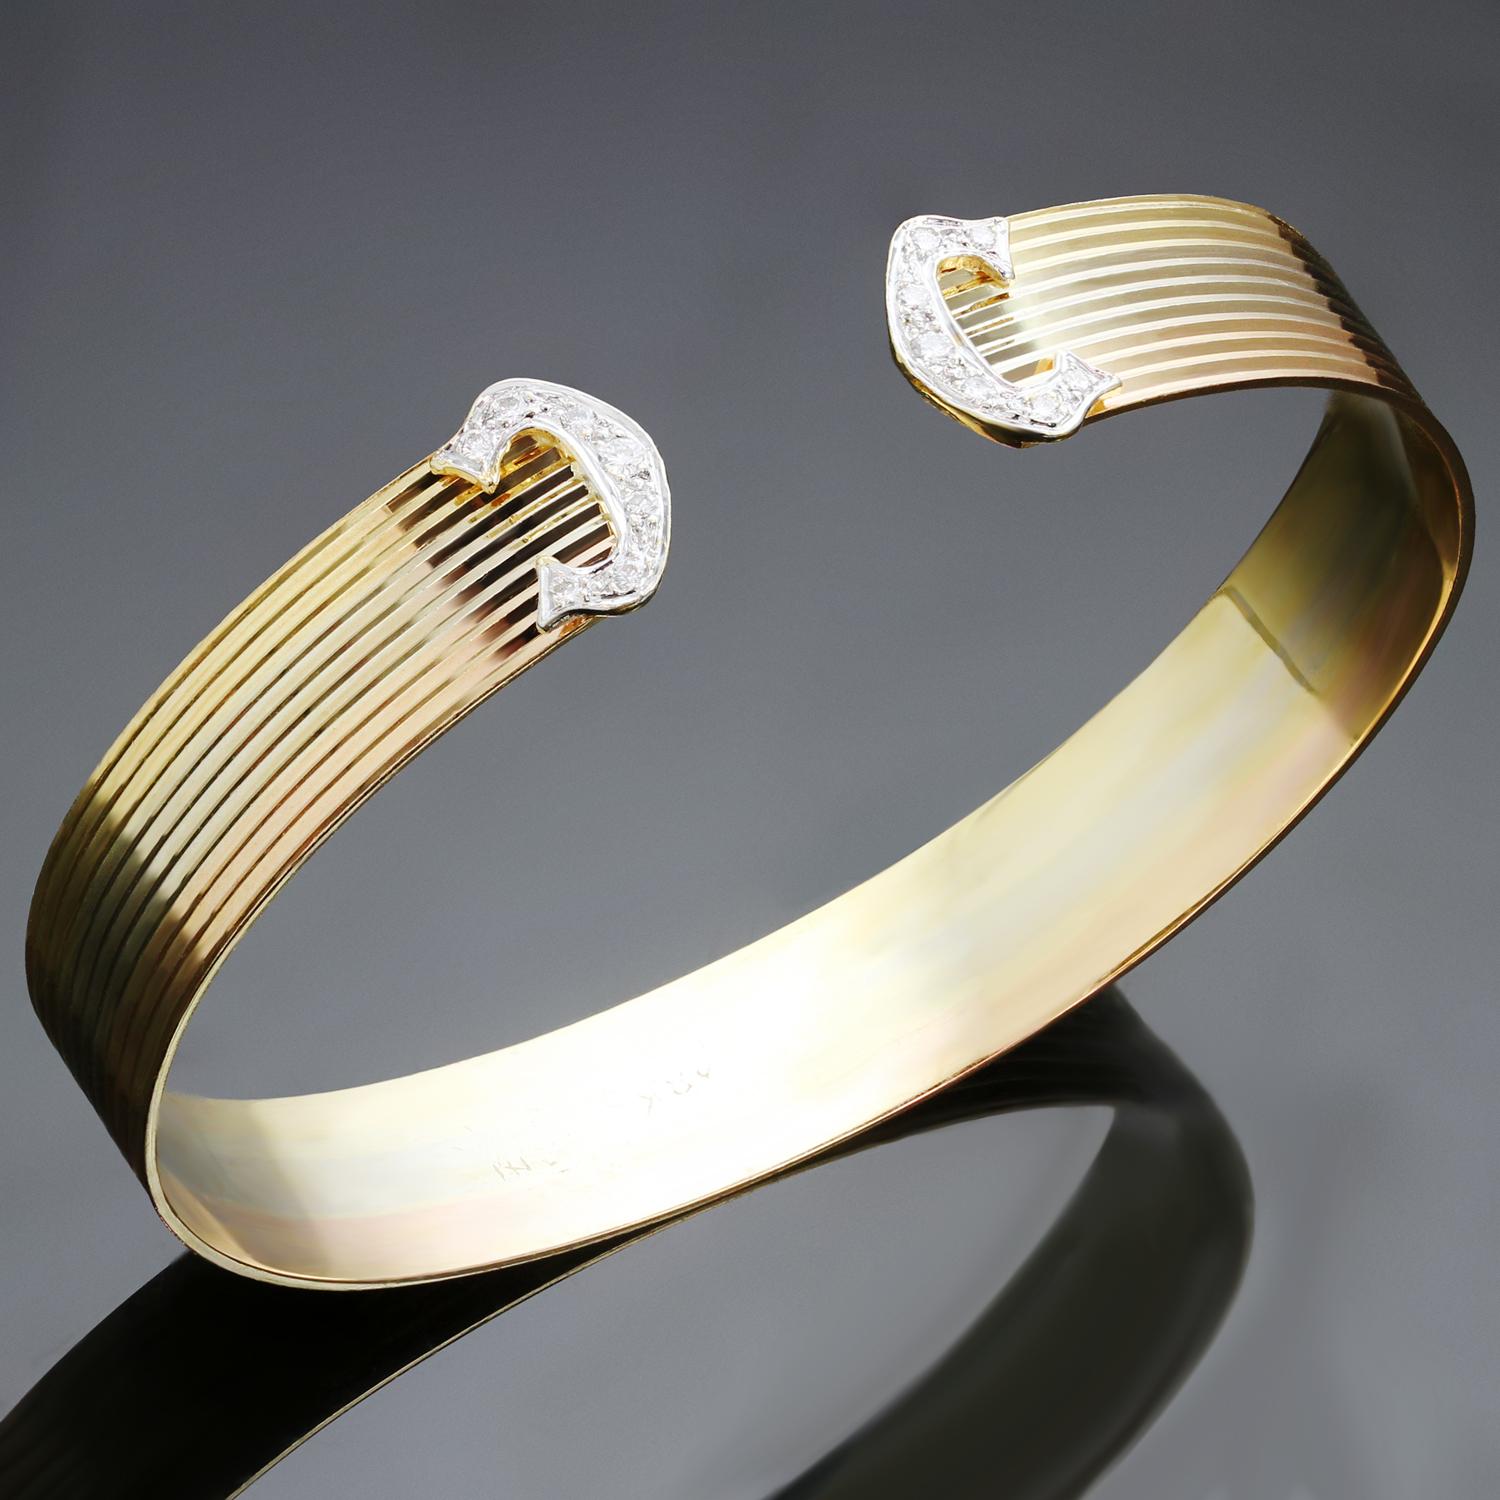 Vintage cuff bangle is crafted in 18k yellow, white, and rose gold. Made in Italy circa 1980s. Measurements: 0.43